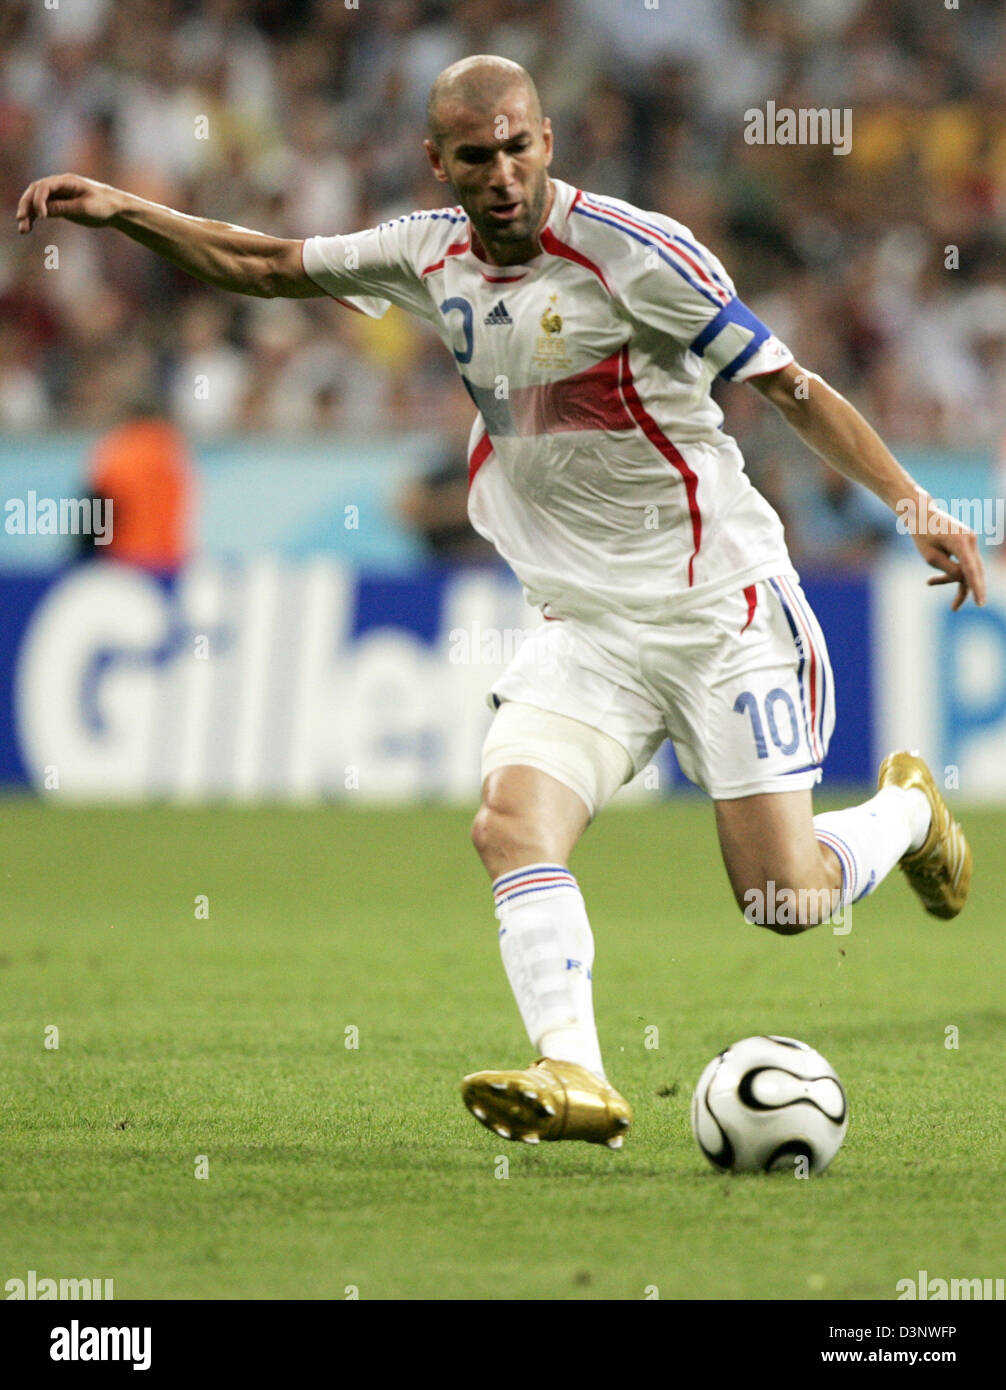 French Zinedine Zidane kicks the ball during the semi final match of the 2006 FIFA World Cup Portugal vs. France in Munich, Germany, Wednesday 05 July 2006. DPA/MATTHIAS SCHRADER +++ Mobile Services OUT +++ Please refer to FIFA's terms and conditions Stock Photo